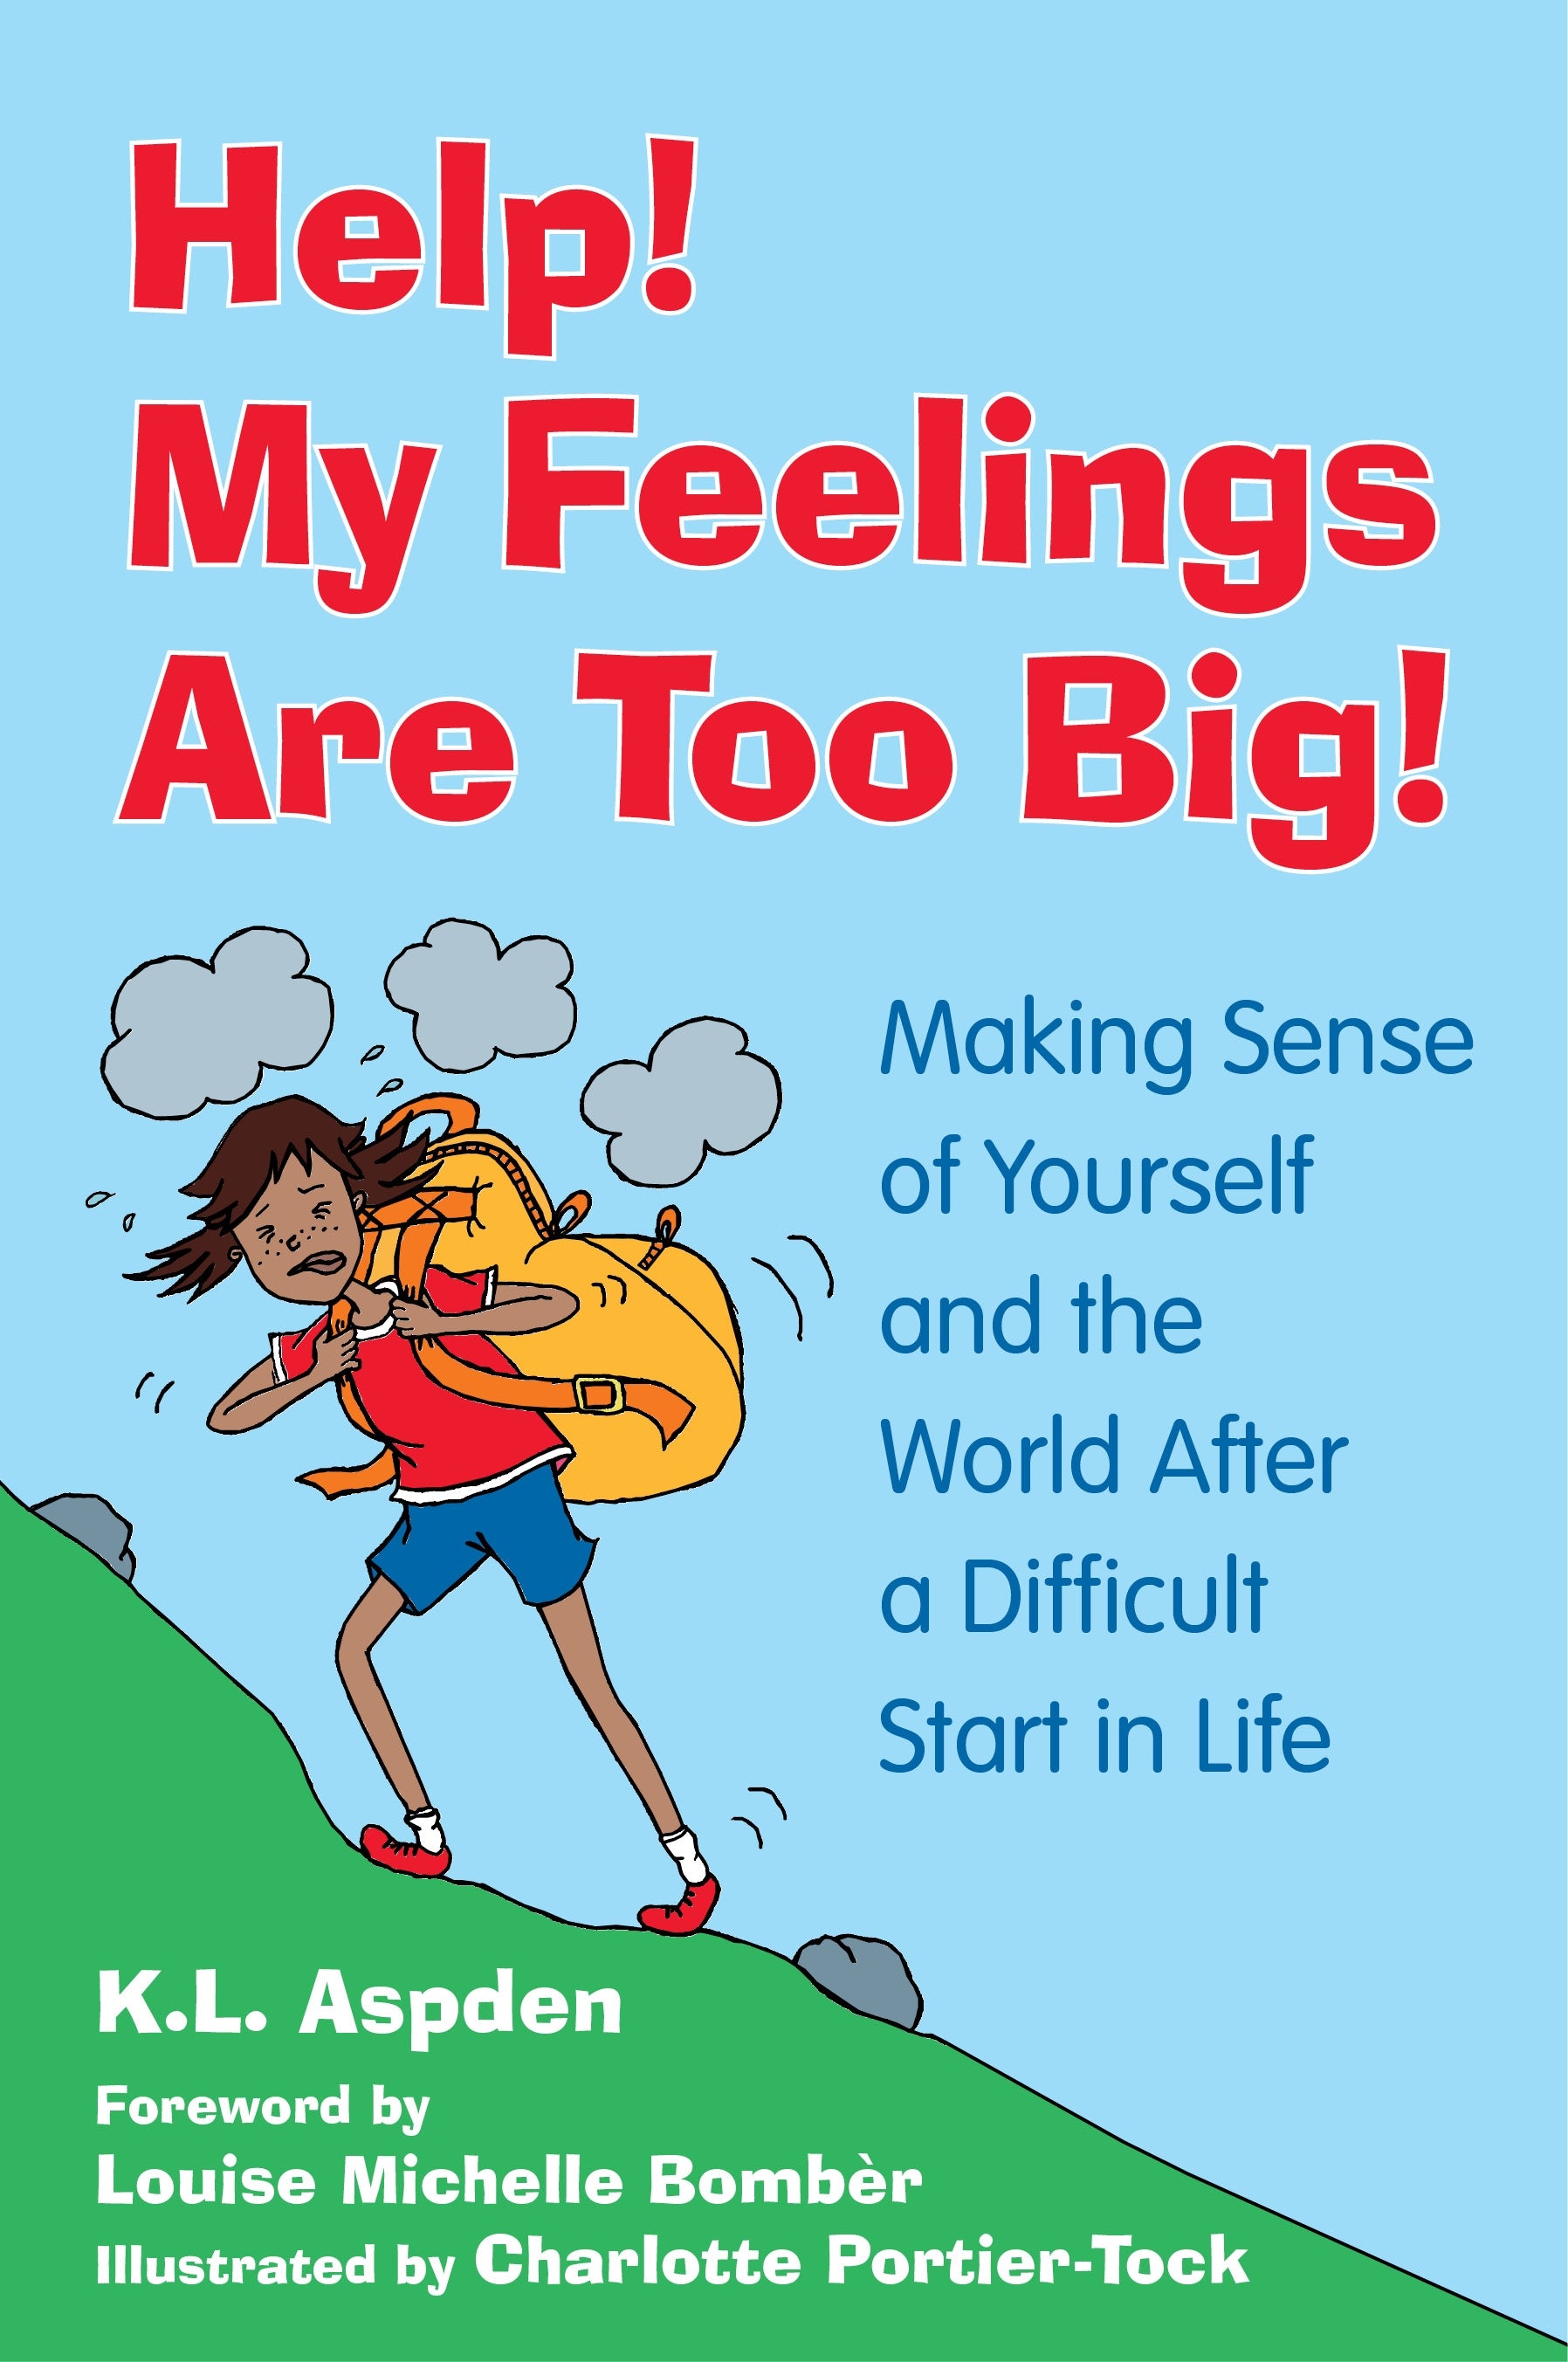 Help! My Feelings Are Too Big! by Louise Michelle Bombèr, Charlotte Portier-Tock, K.L. Aspden